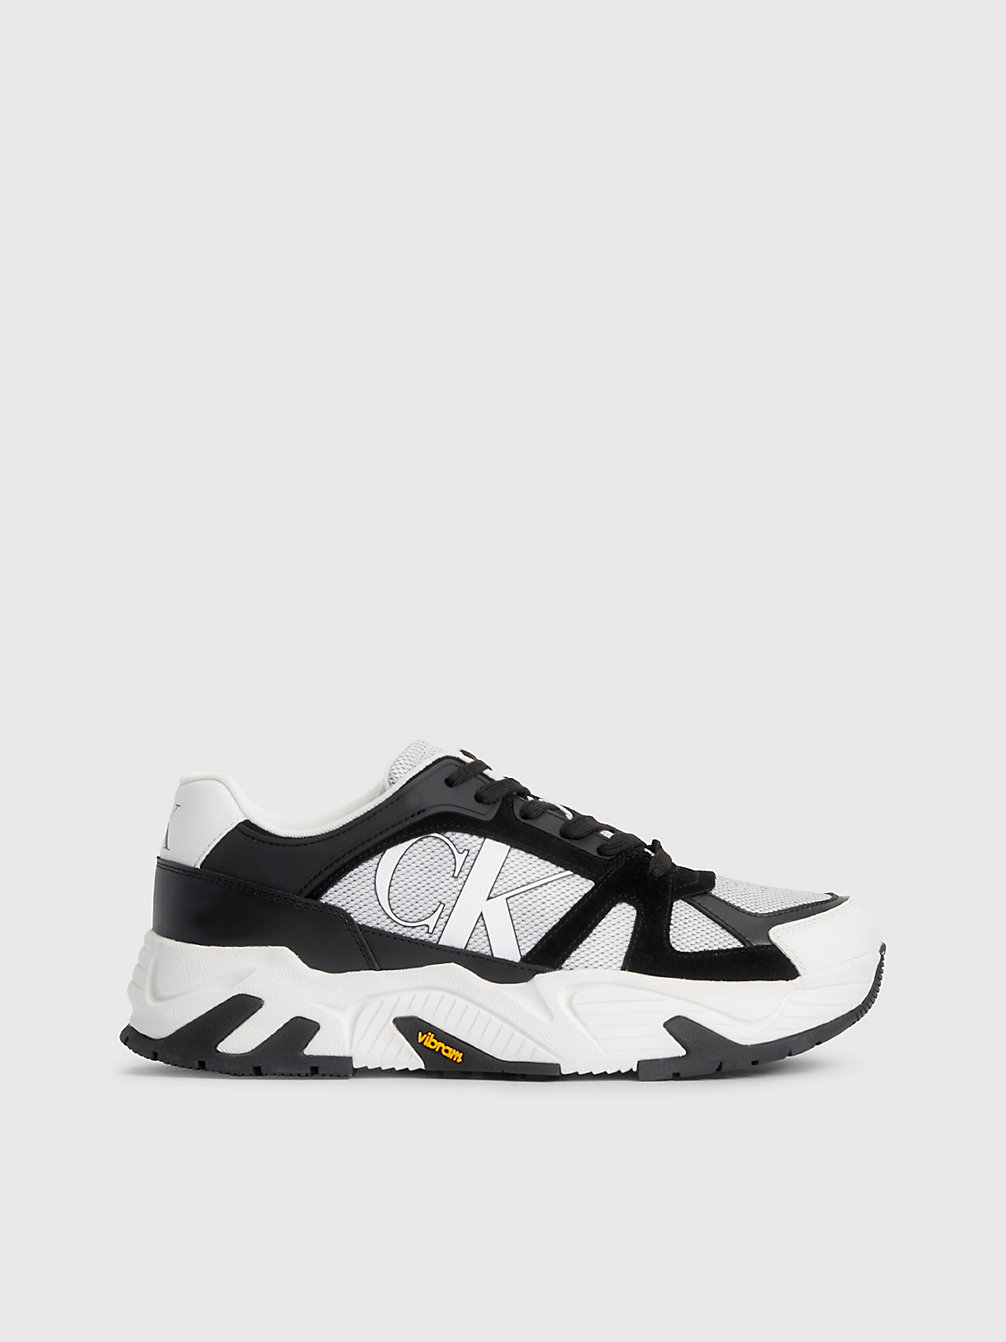 BRIGHT WHITE/BLACK Leather Vibram® Chunky Trainers undefined men Calvin Klein